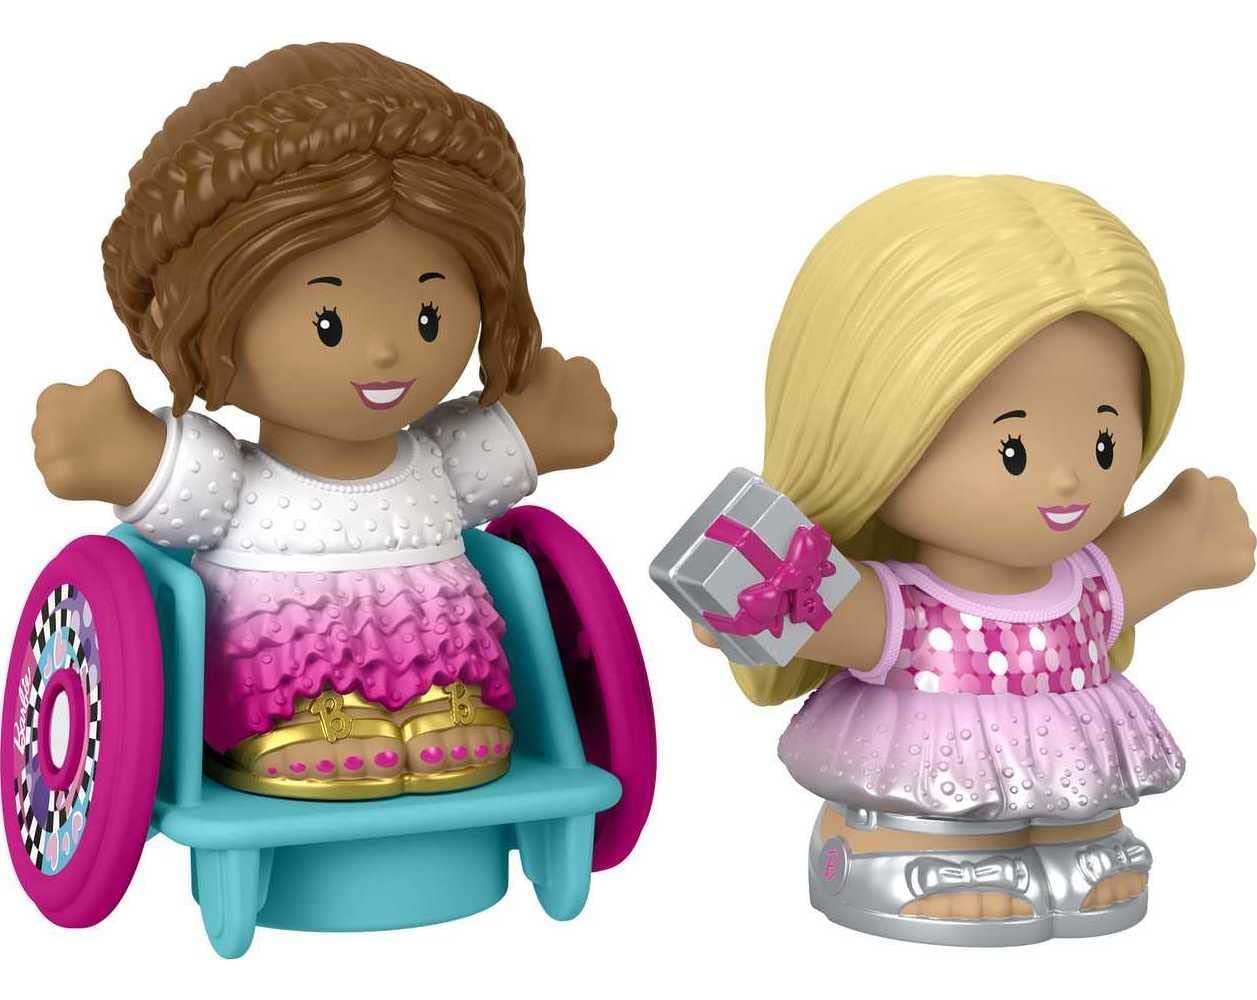 Fisher-Price Little People Barbie Toddler Toys Party Figure Pack, 2 Characters f - $8.86 - $9.85